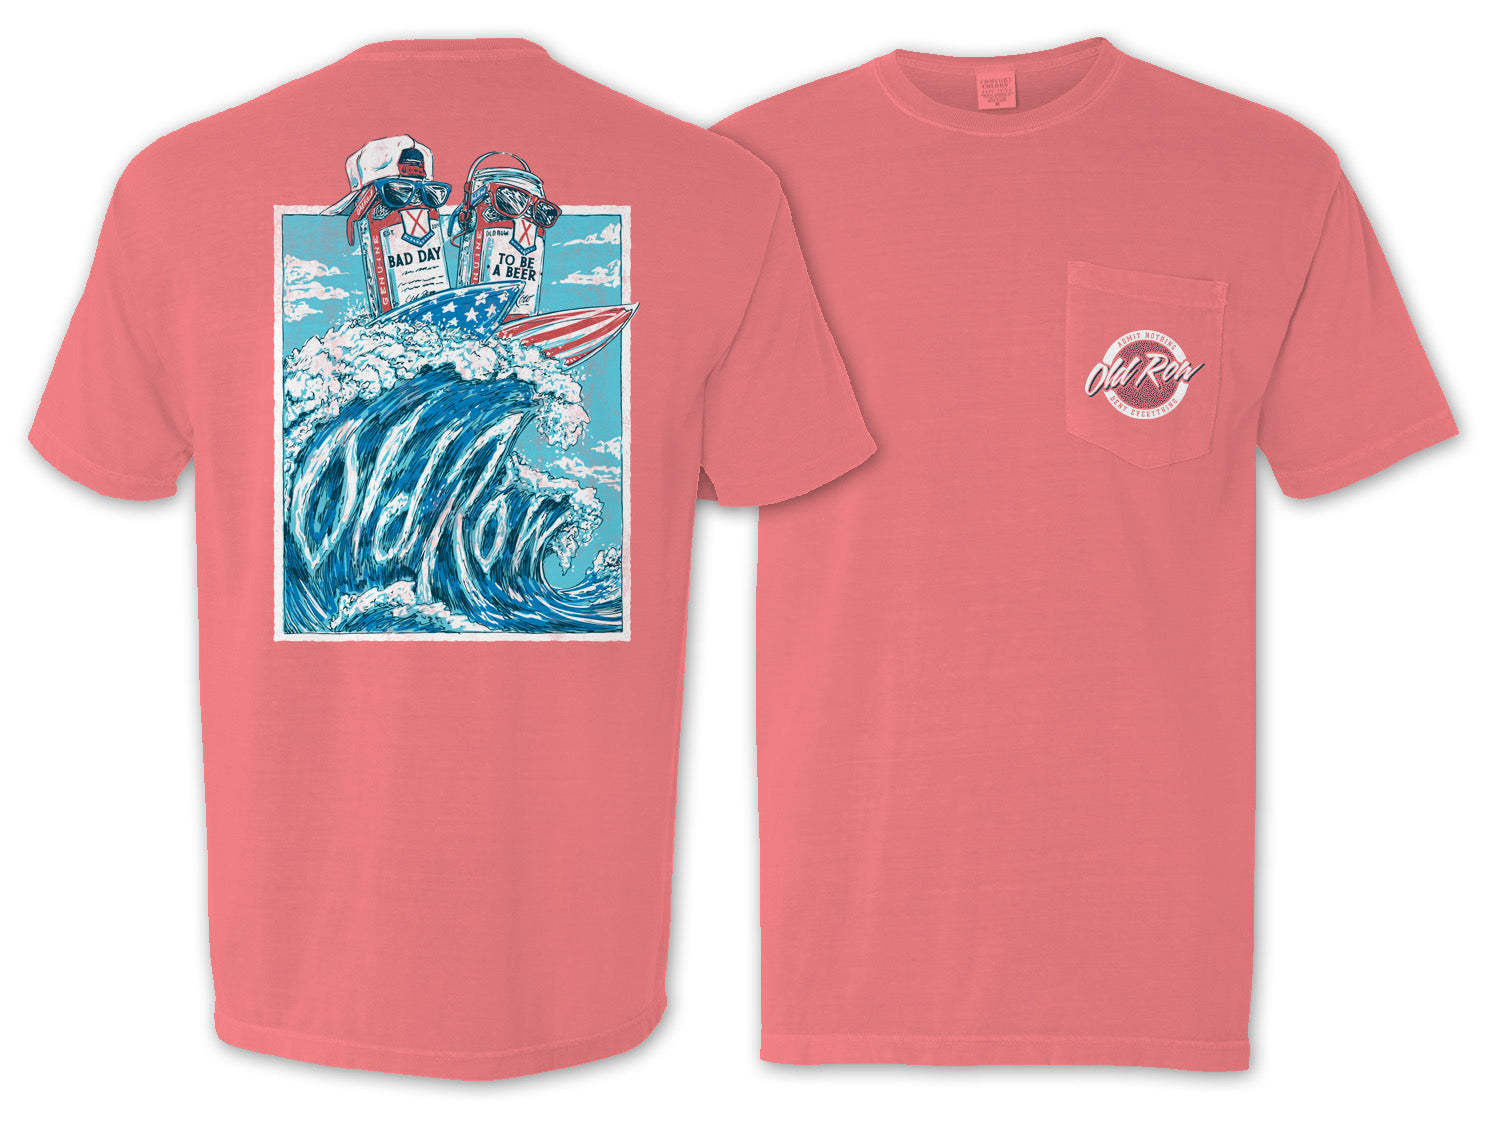 Bad Day To Be A Beer Surf's Up Pocket Tee